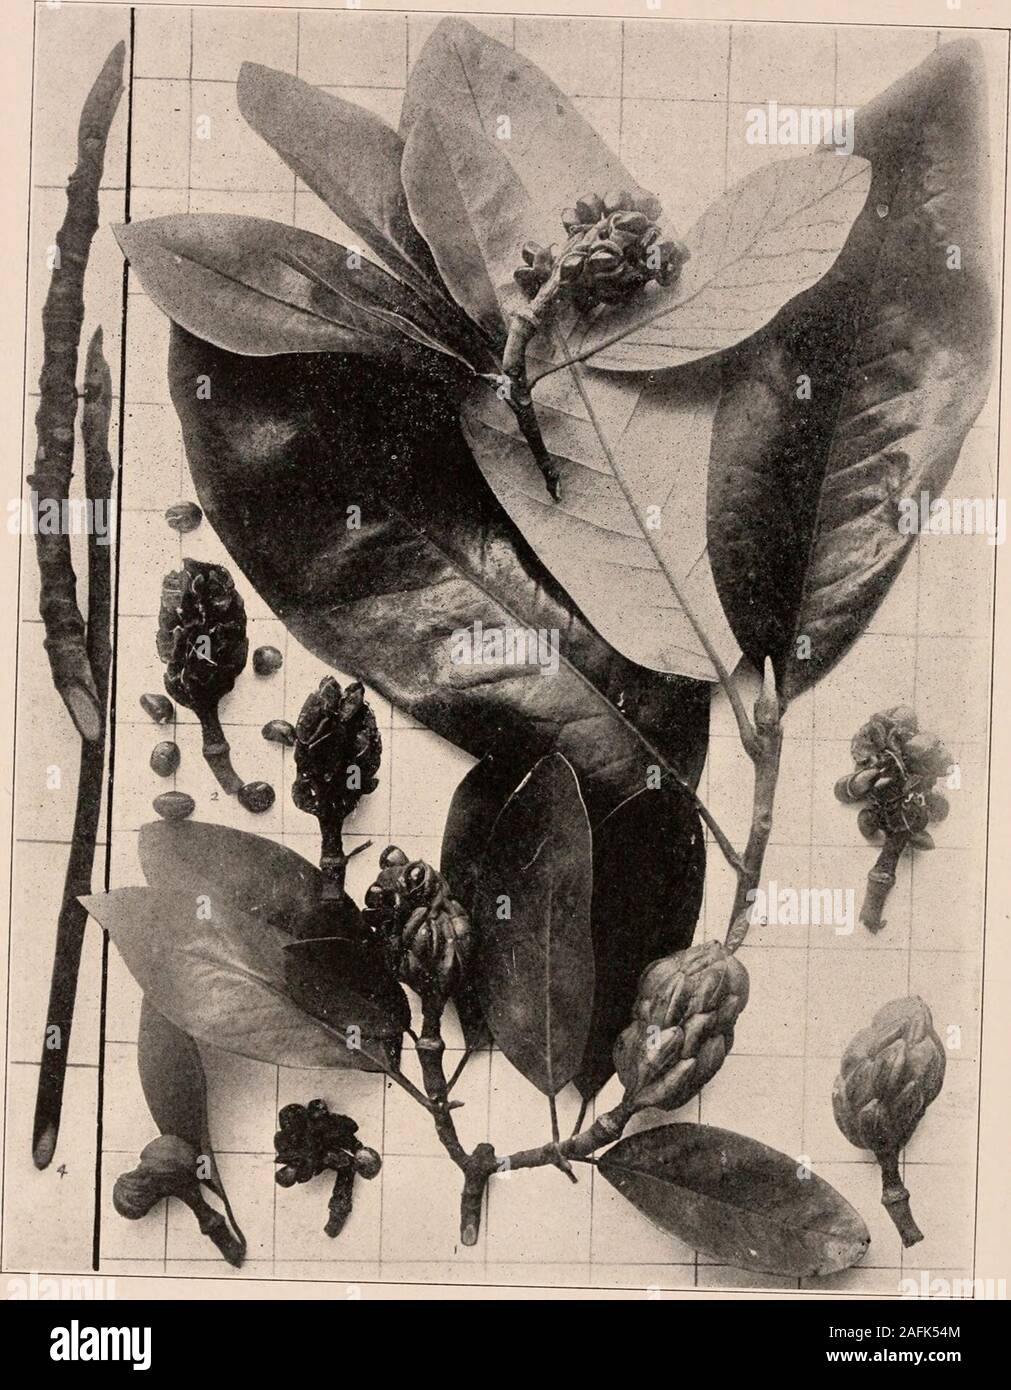 . Handbook of the trees of the northern states and Canada east of the Rocky mountains. Photo-descriptive. SWEET BAY. Magnolia gJauca L.. S/sltwfn;nit^:iHci;rlnd^ one closed and one with escaping seeds, i; for the next seaso^nf 3 ; branchlets fn wfnter 4 ^ ^^^ ^^^^^^^^^ showing ttower-bud 244- Trunk of a tree with leaves at base. Handbook of Trees of the Nortuekn States and Canada. 213 This favorite tree in the forests of the southAtlantic and (.Uilf states attains tlie lieight of,liU or 70 ft., with trunk 2-3 ft. in diameterfovered witli a brownish gray bark, whicii maybe universally smooth or Stock Photo